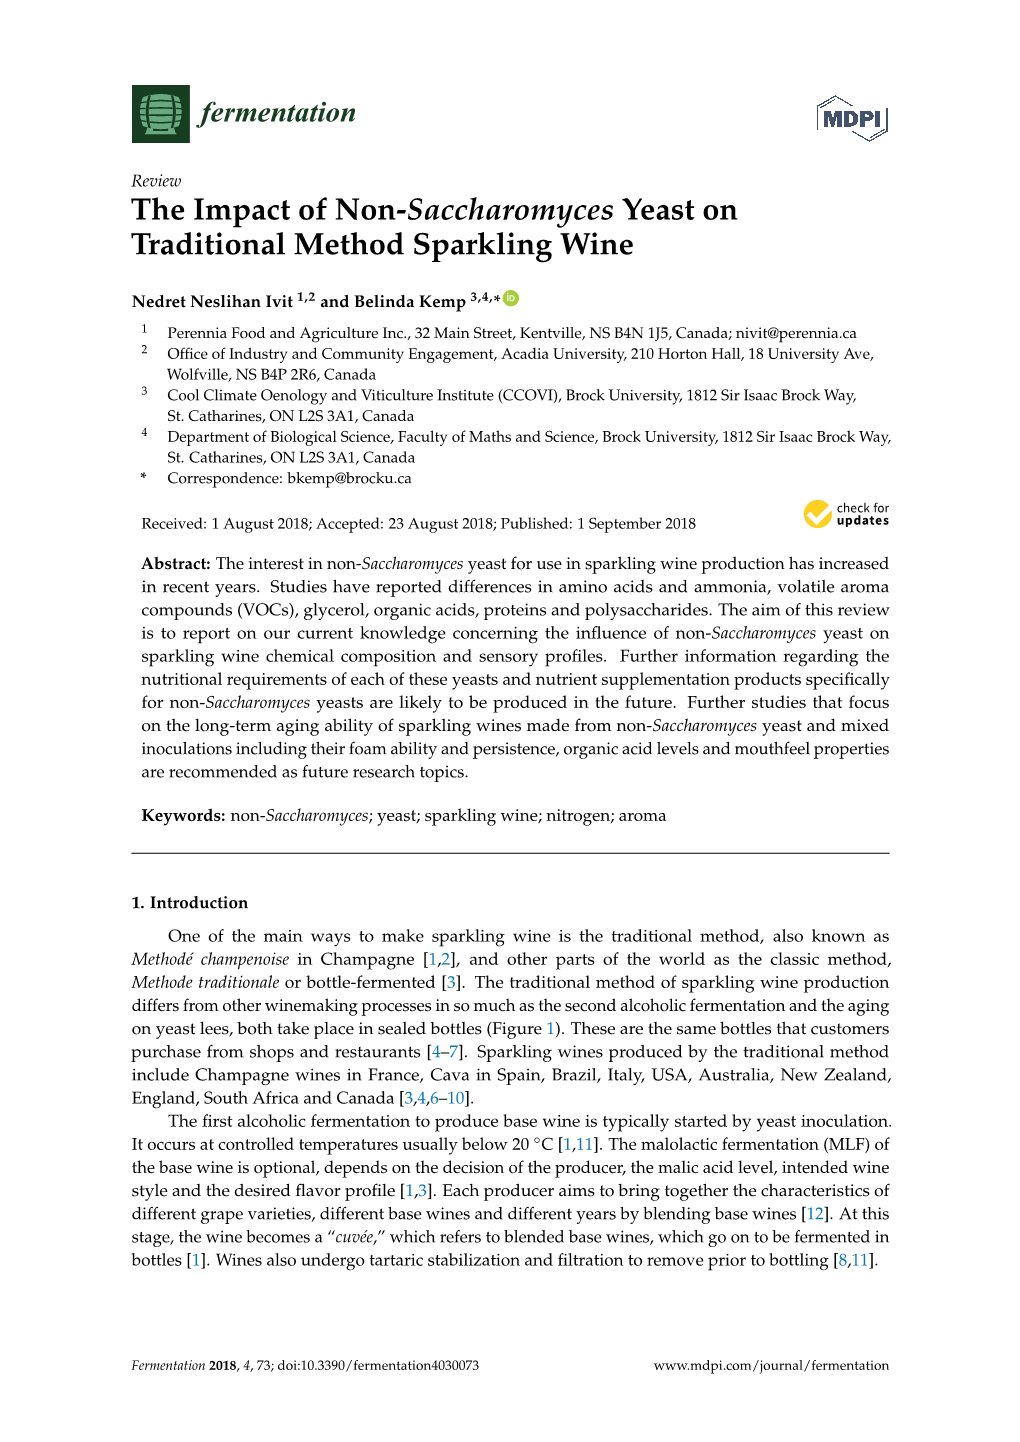 The Impact of Non-Saccharomyces Yeast on Traditional Method Sparkling Wine